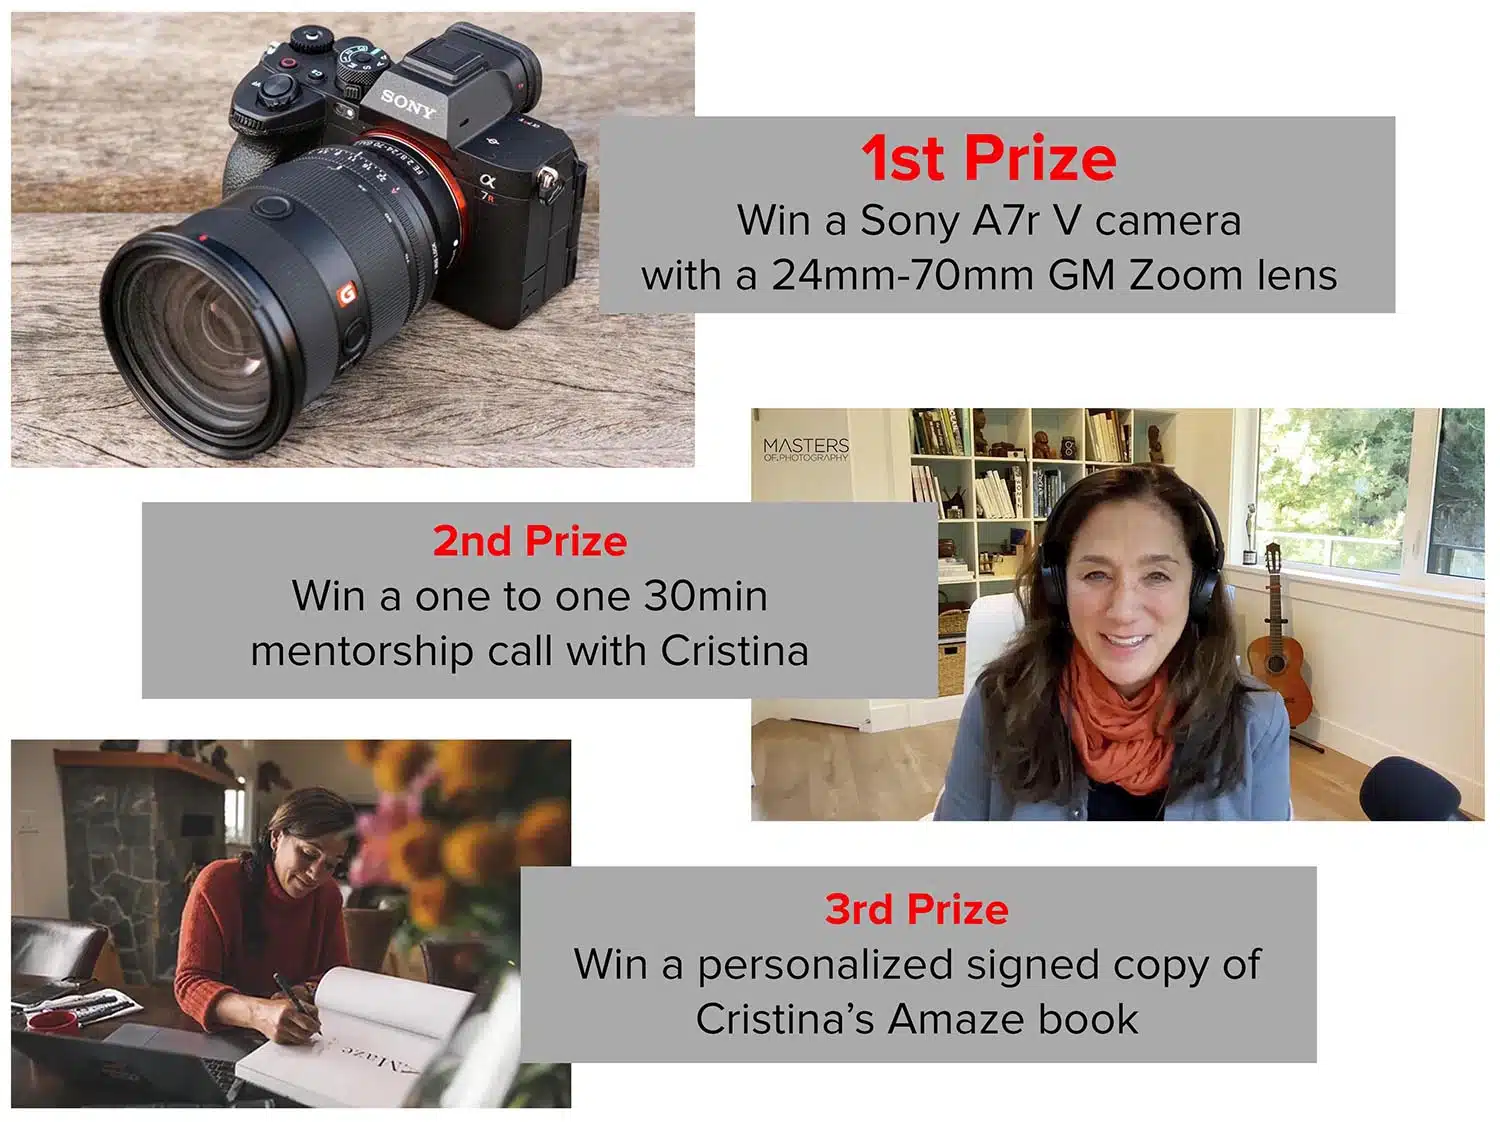 Cristina Mittermeier – Photography Competition